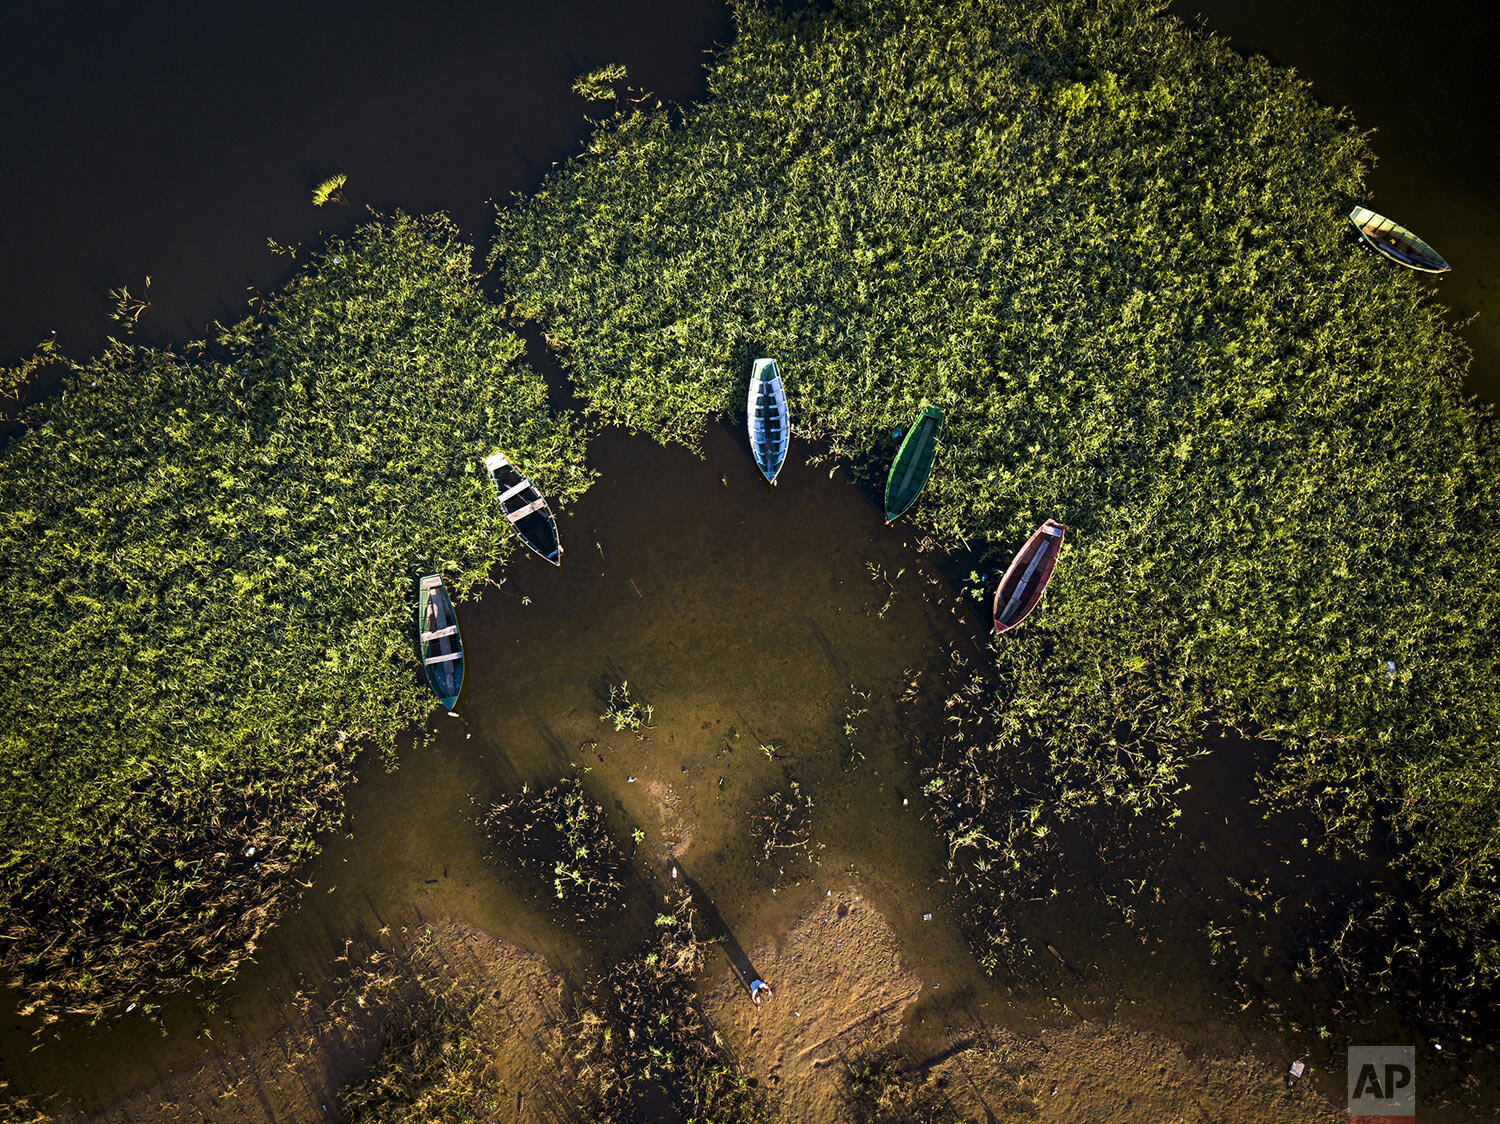  Boats sit idle as a fisherman, standing bottom center, prepares to go out to the Bay of Asuncion, Paraguay, Jan. 8, 2021. (AP Photo/Jorge Saenz) 